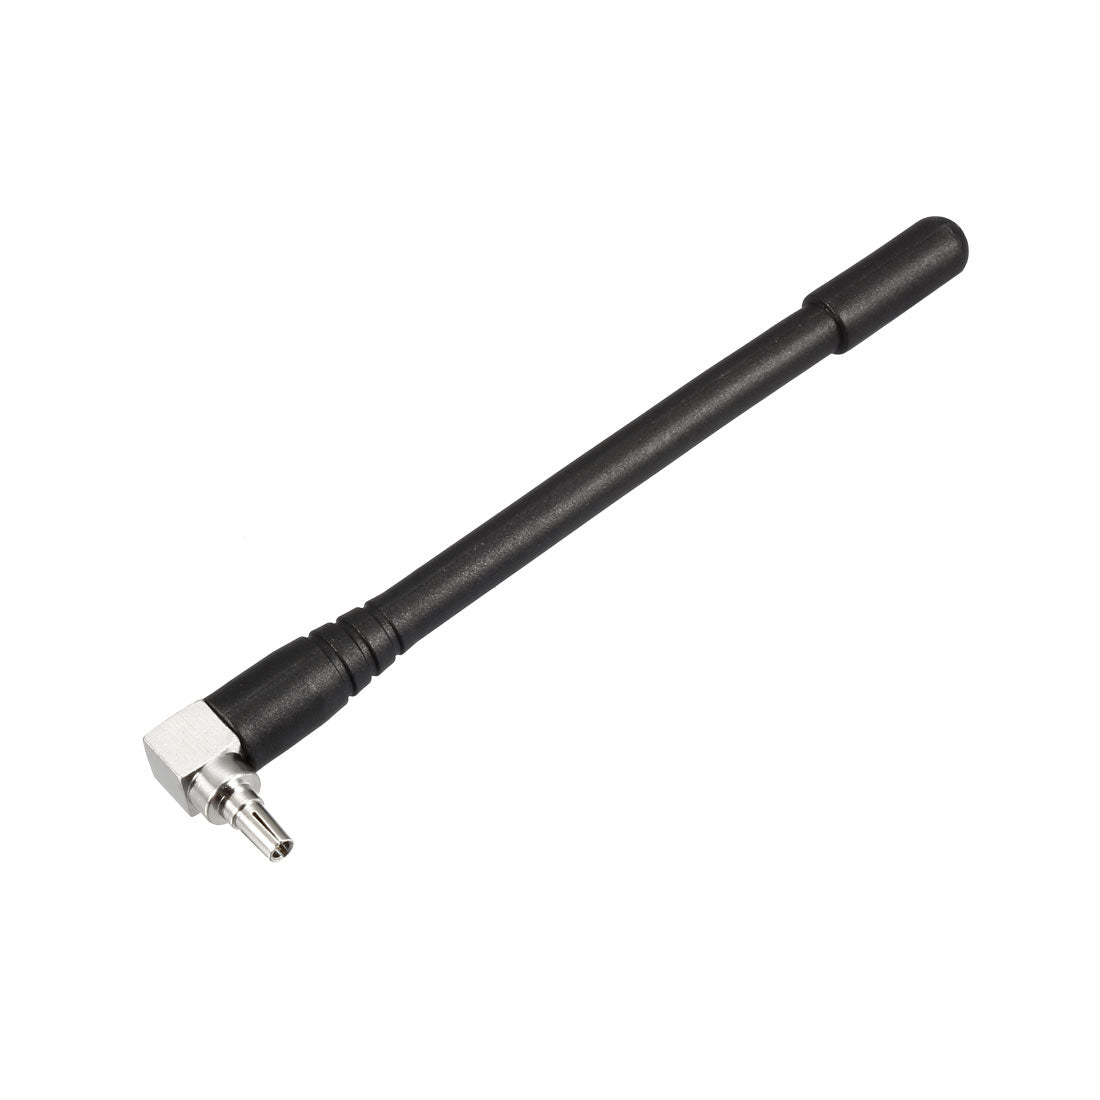 uxcell Uxcell GSM GPRS WCDMA LTE Antenna 3G 4G 3dBi 700-2700MHz CRC9 Male Right Angle Connector Omni Directional 2Pcs